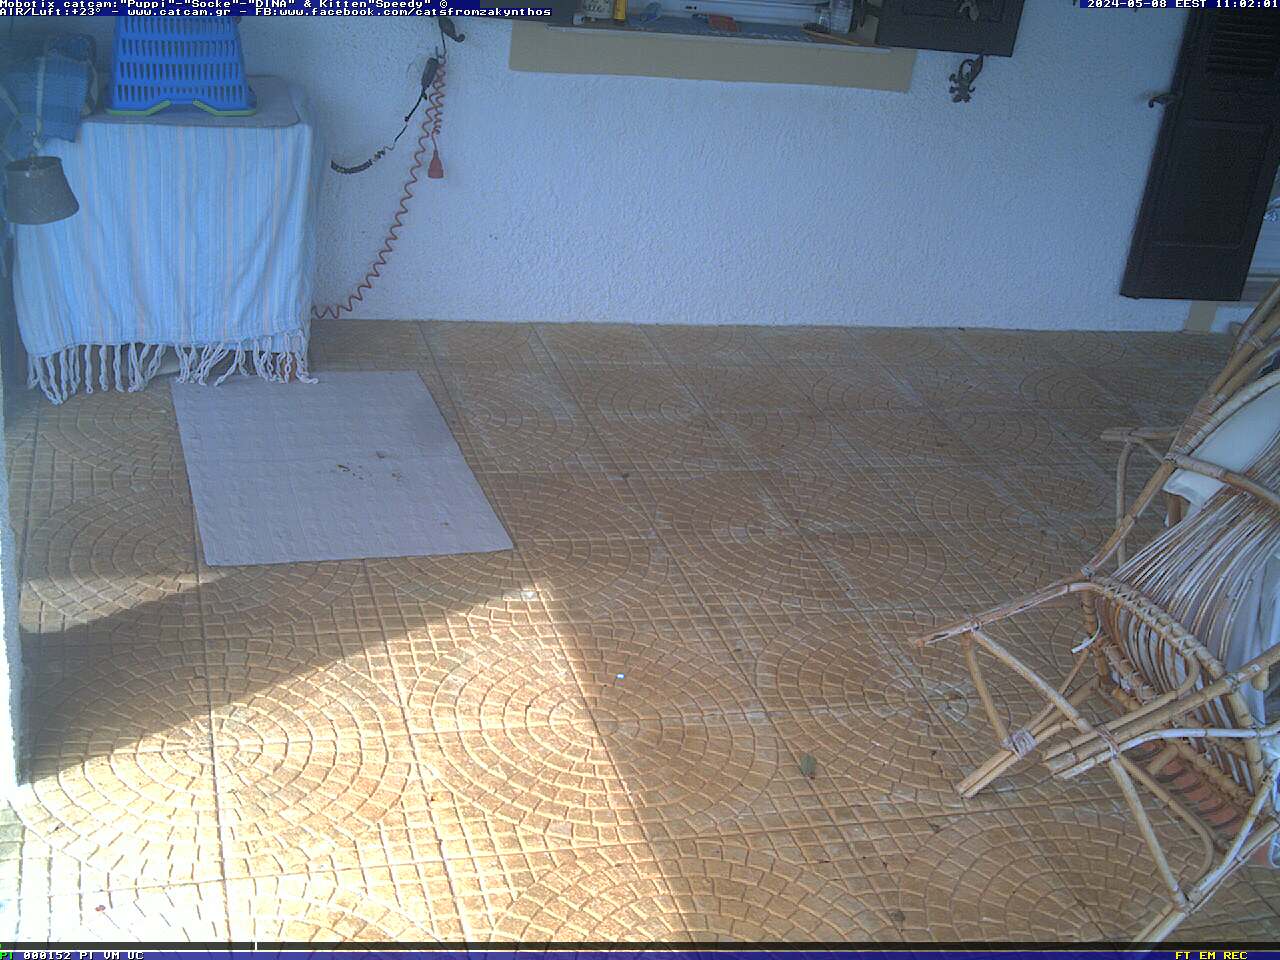 The first CatCam from Greece